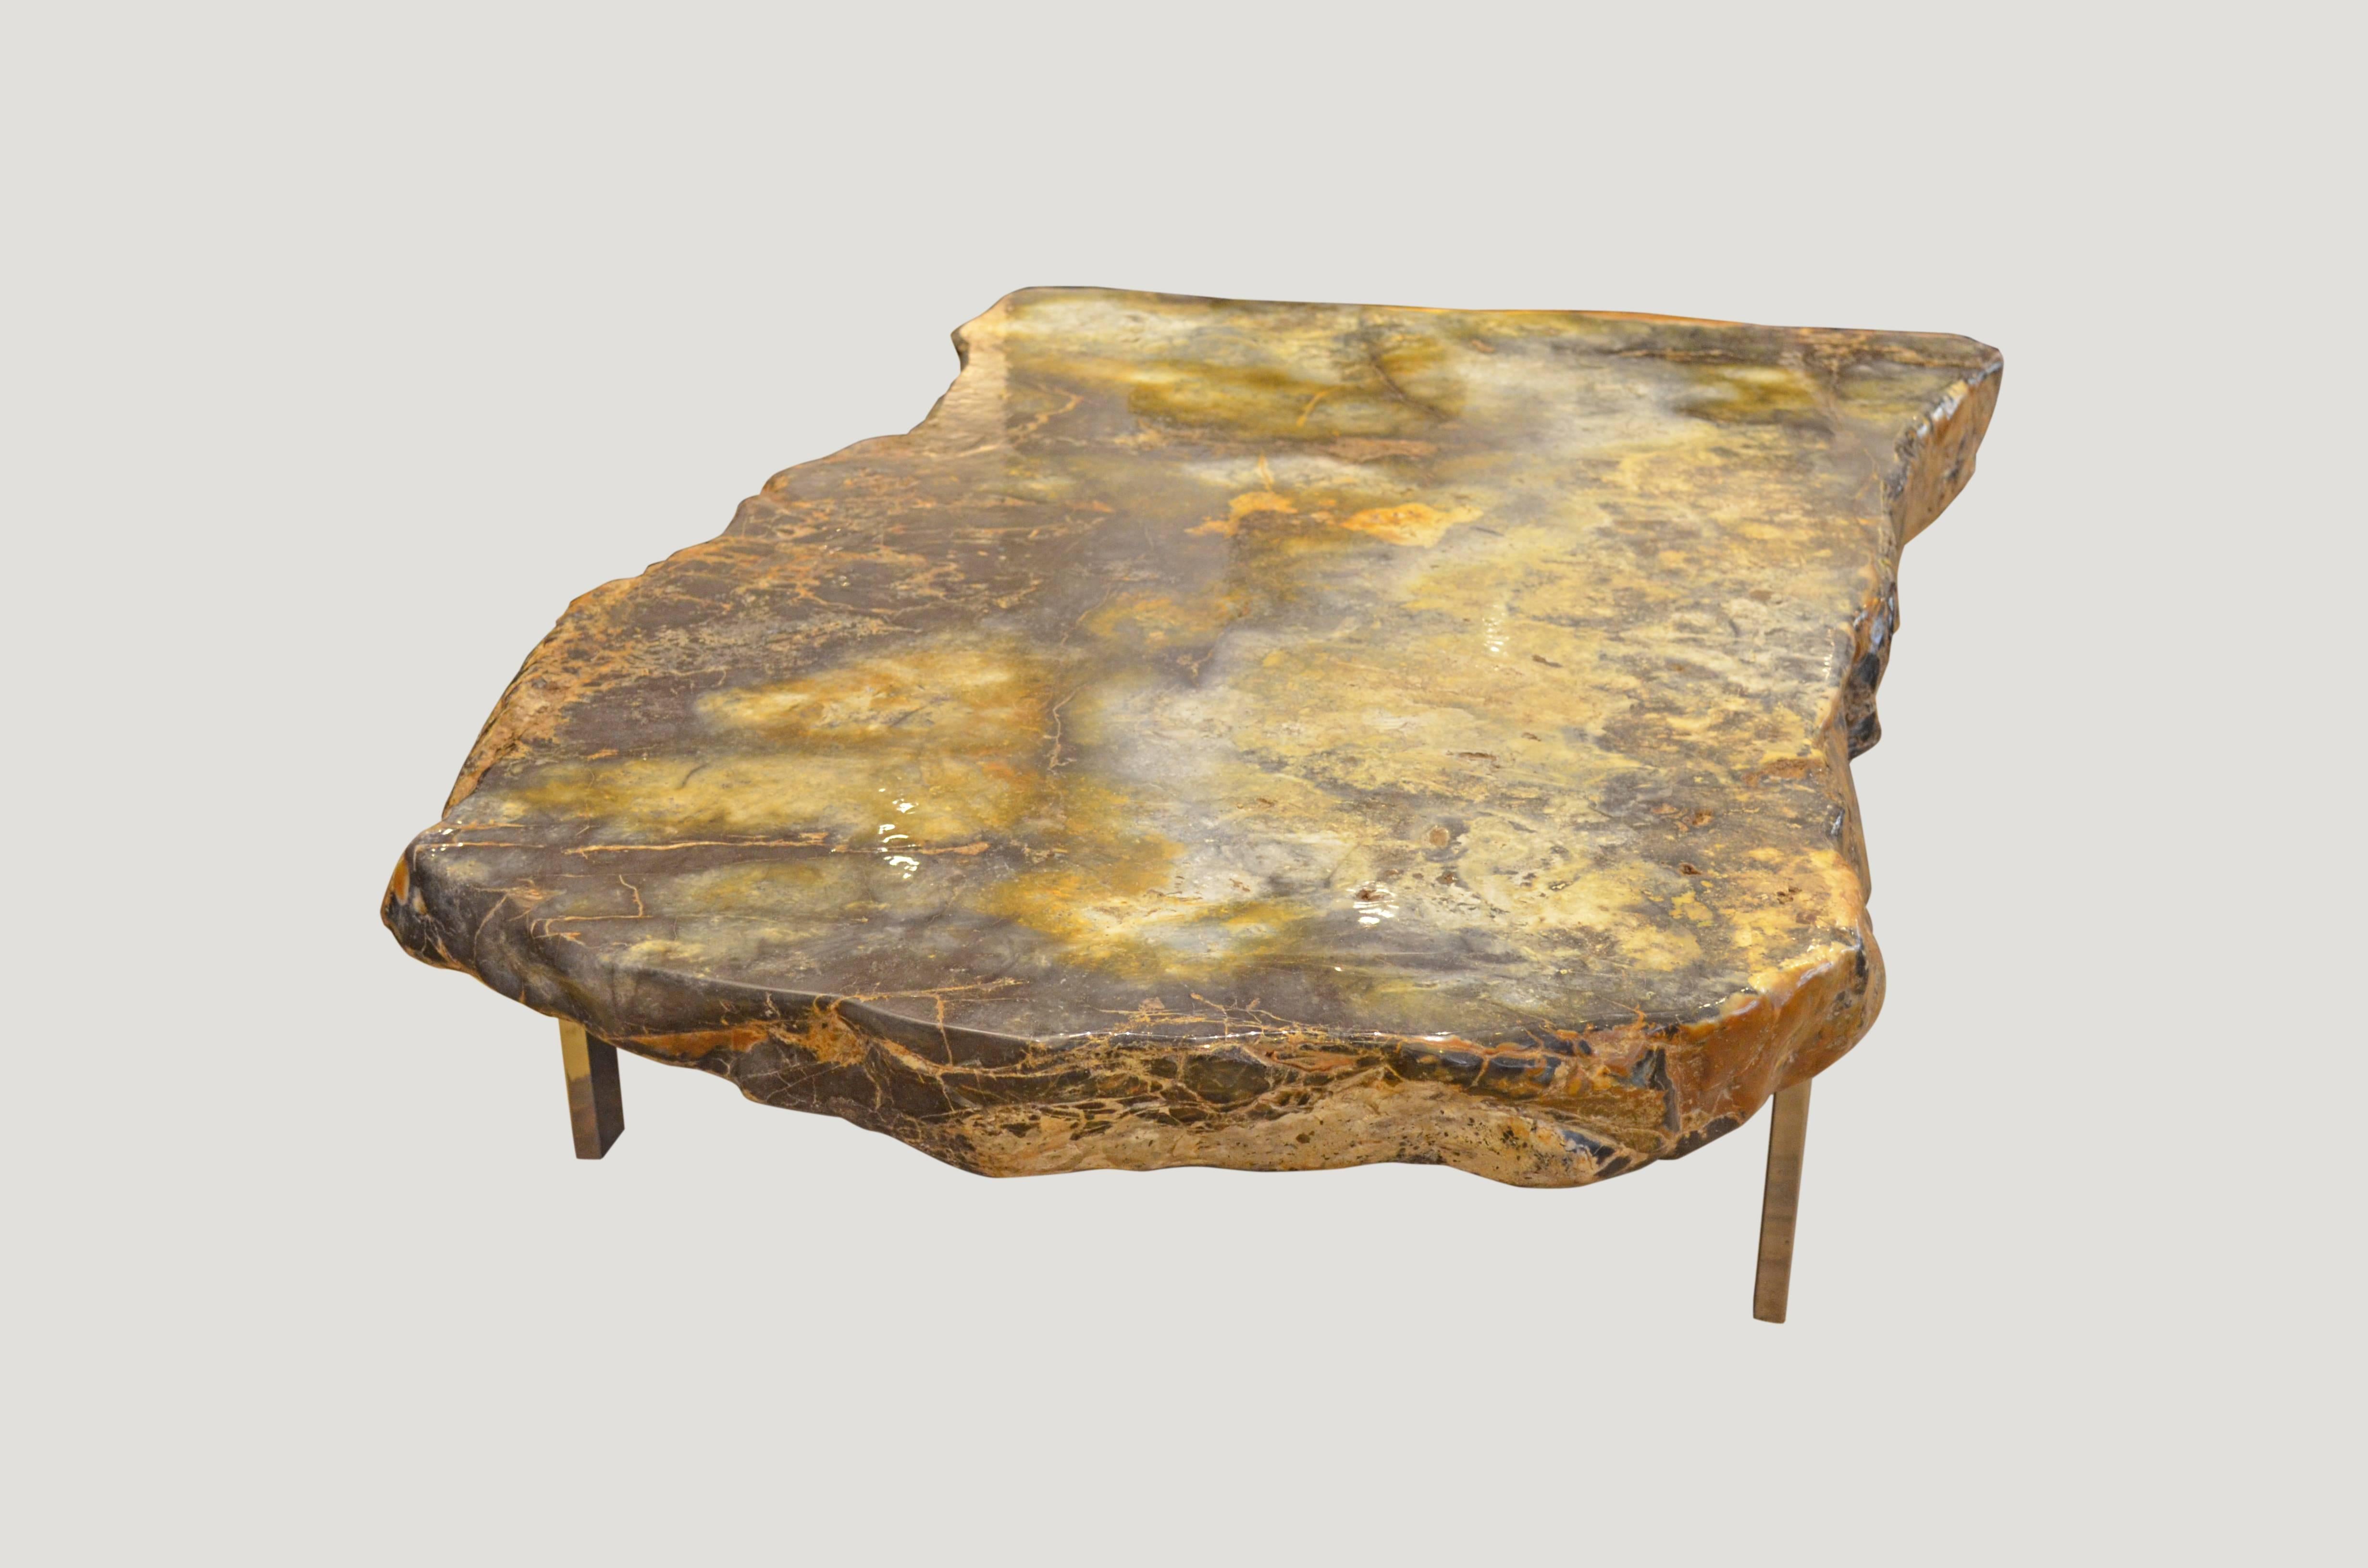 Spectacular single pancawama petrified wood coffee table in stunning indigo, white and olive contrasting tones.

Pancawarna means “five colors” or “multicolored” in Sanskrit and is a term that has been used for centuries to refer to the multicolored